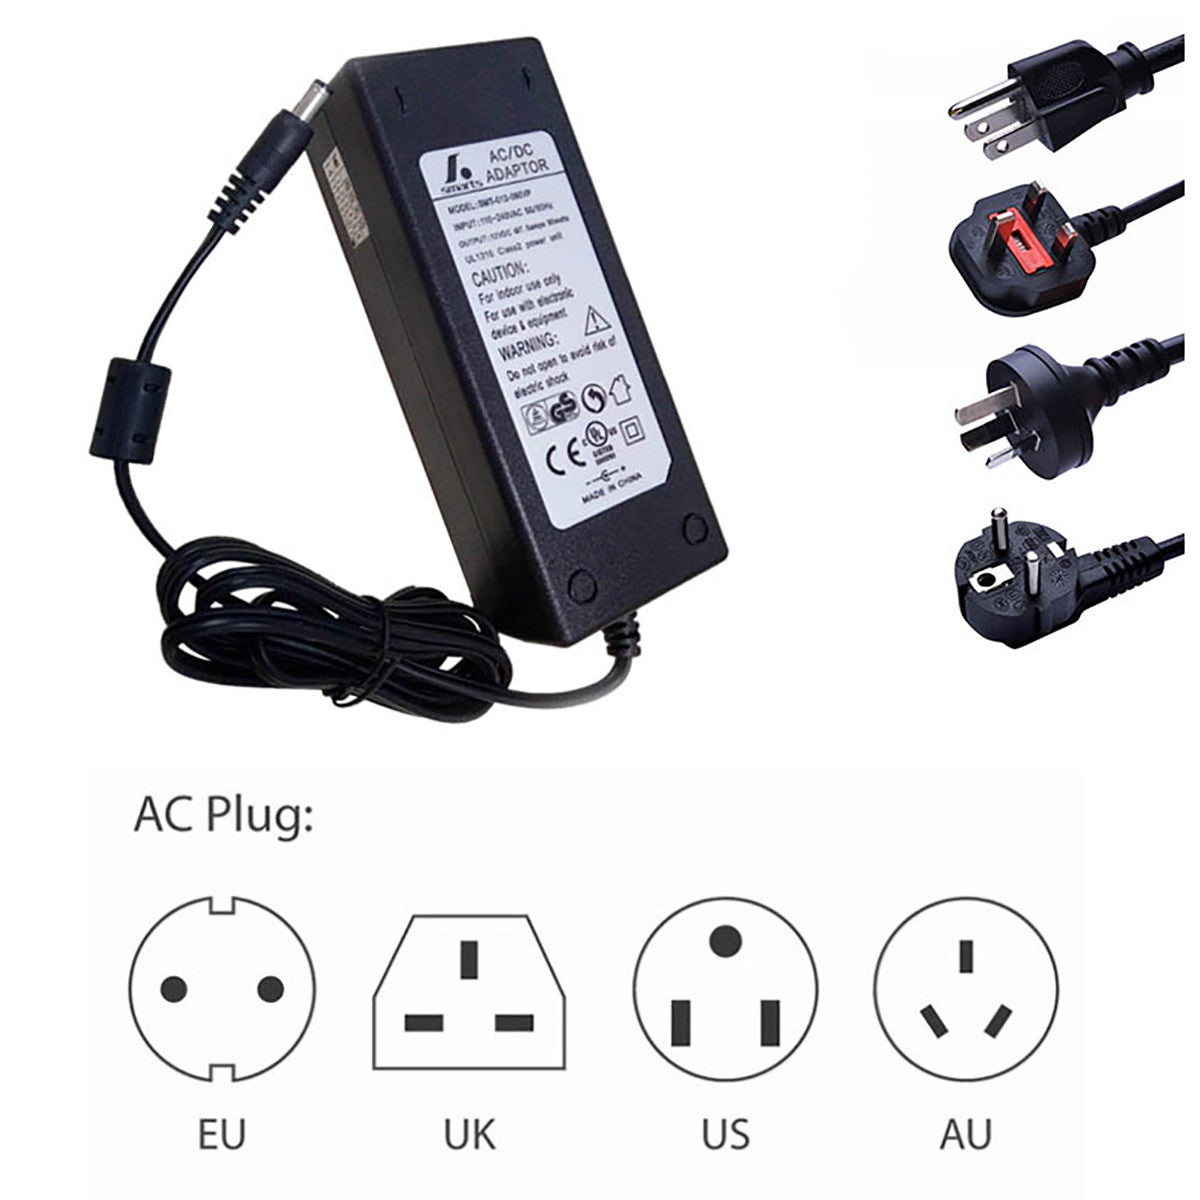 LightingWill LED Driver 100 Watts Waterproof IP67 Power Supply Transformer,  90-265V AC to 12V DC Low Voltage Output, Adapter with 3-Prong Plug 3.3